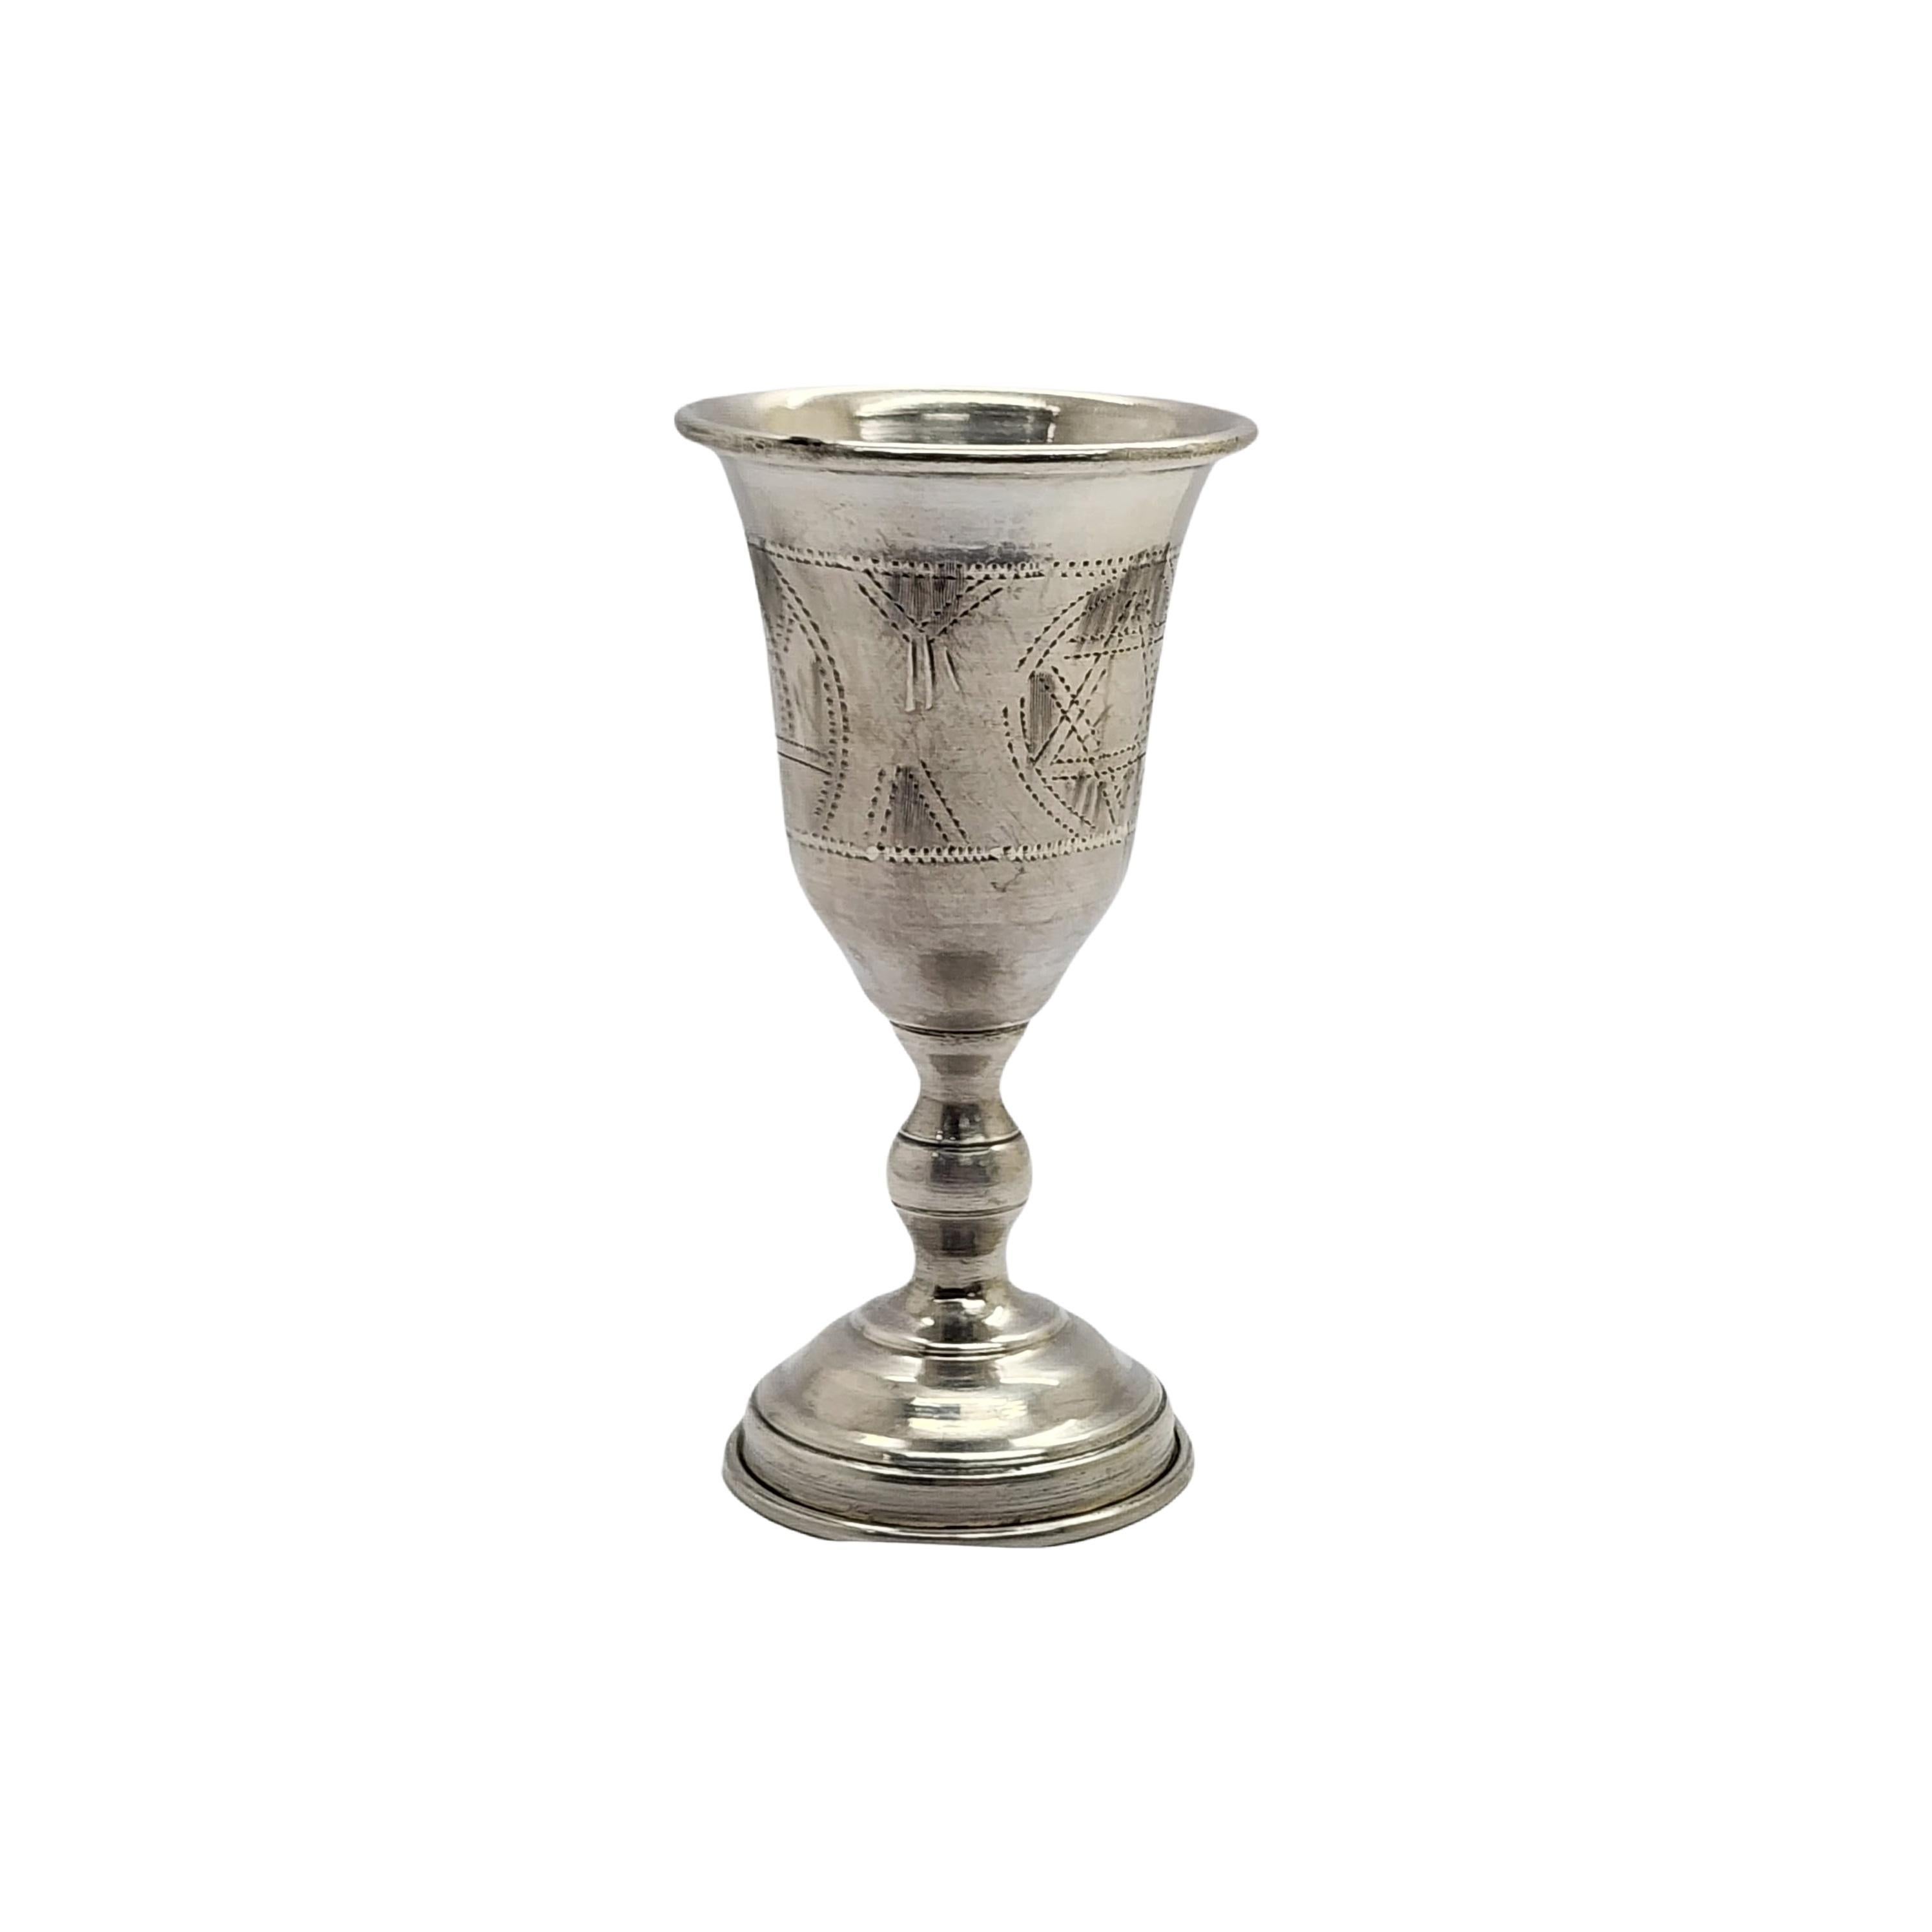 Vintage sterling silver 84 kiddush cup.

No monogram or engraving.

Goblet style cup with beautiful bright cut etched designs around the cup, including The Star of David.

Measures approx 3 1/2